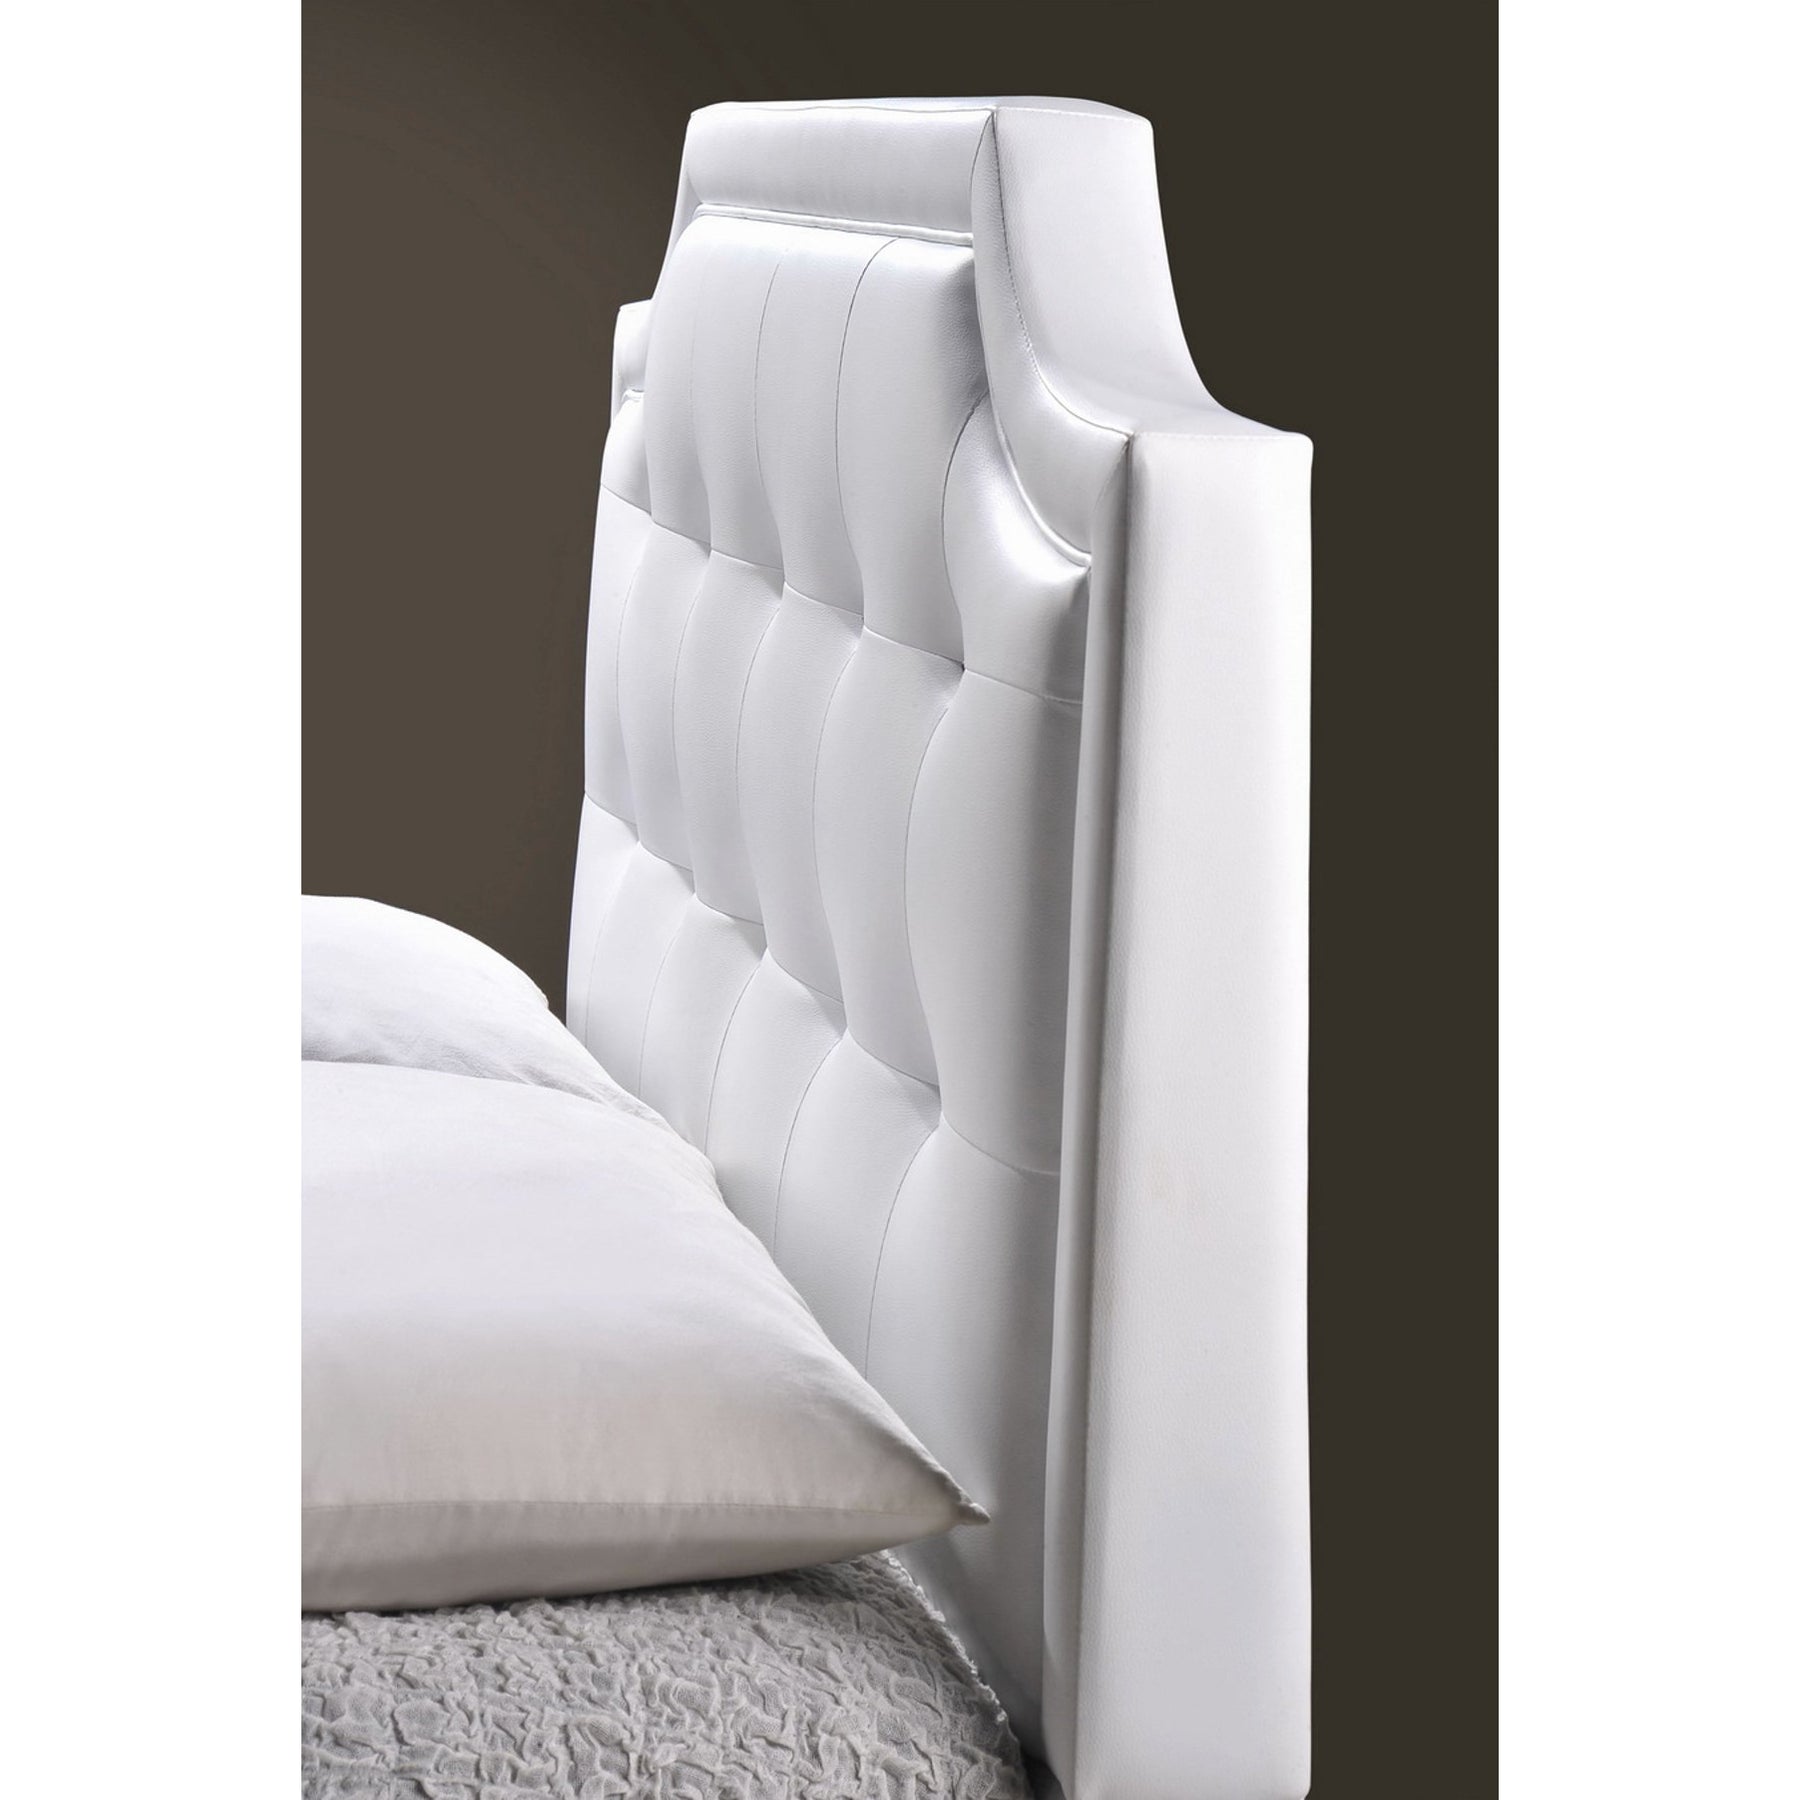 Baxton Studio Carlotta White Modern Bed with Upholstered Headboard - King Size Baxton Studio-beds-Minimal And Modern - 5